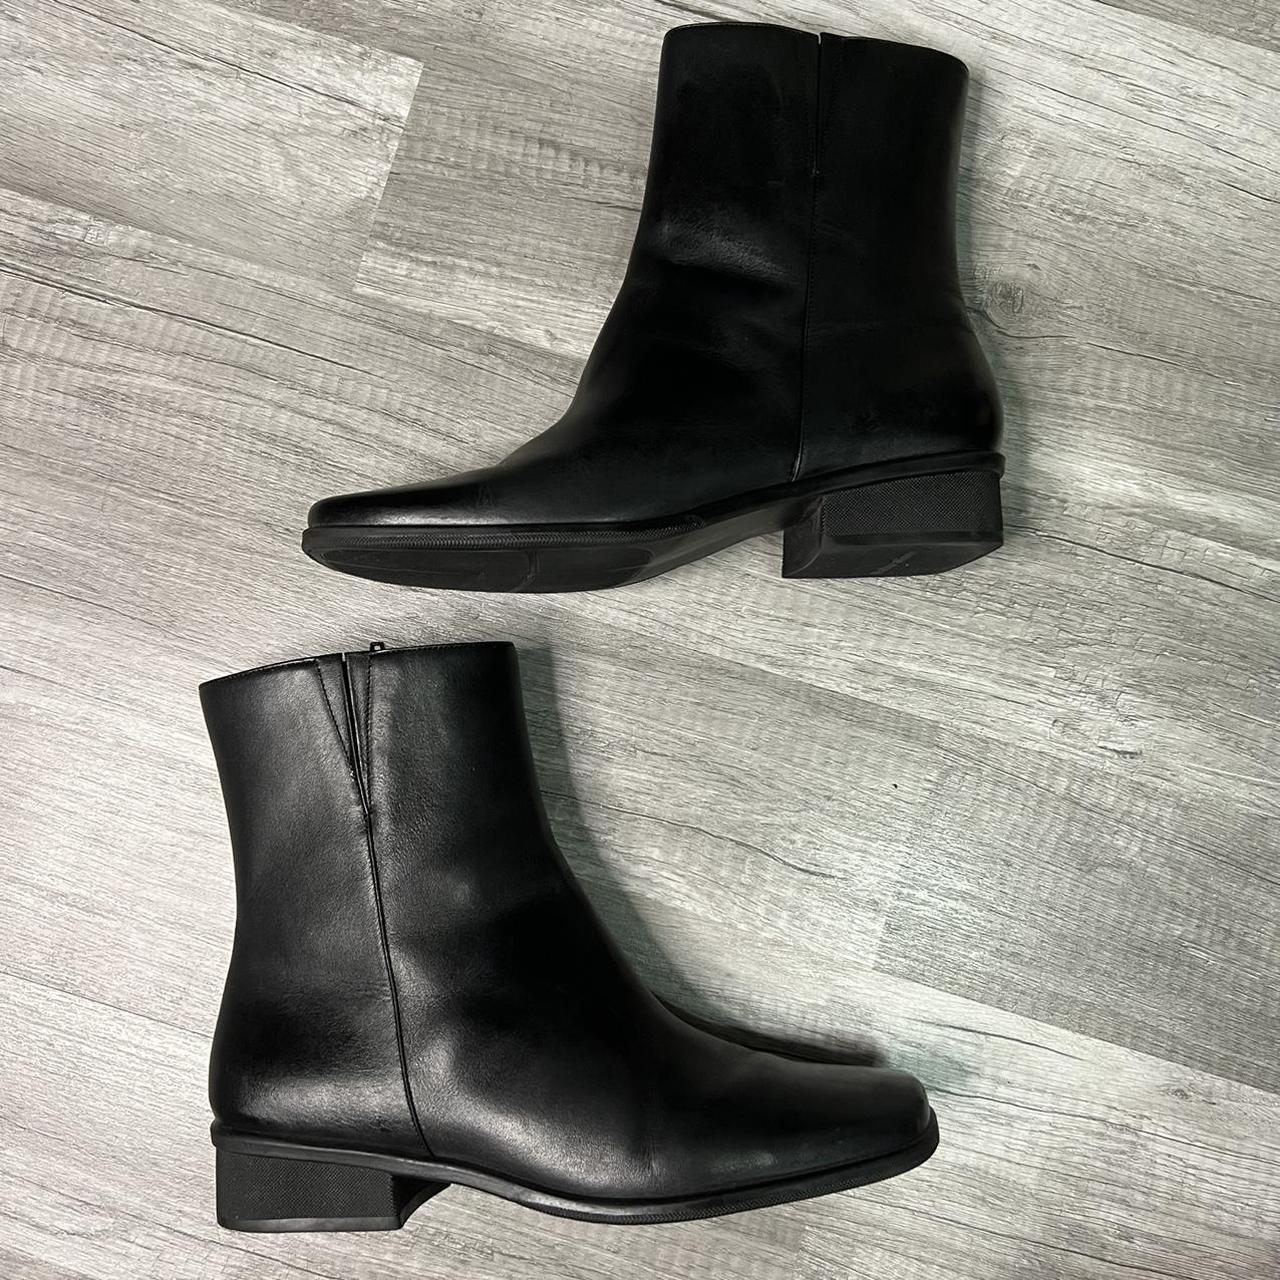 Product Image 2 - Women's 90s Leather Boots 

Black